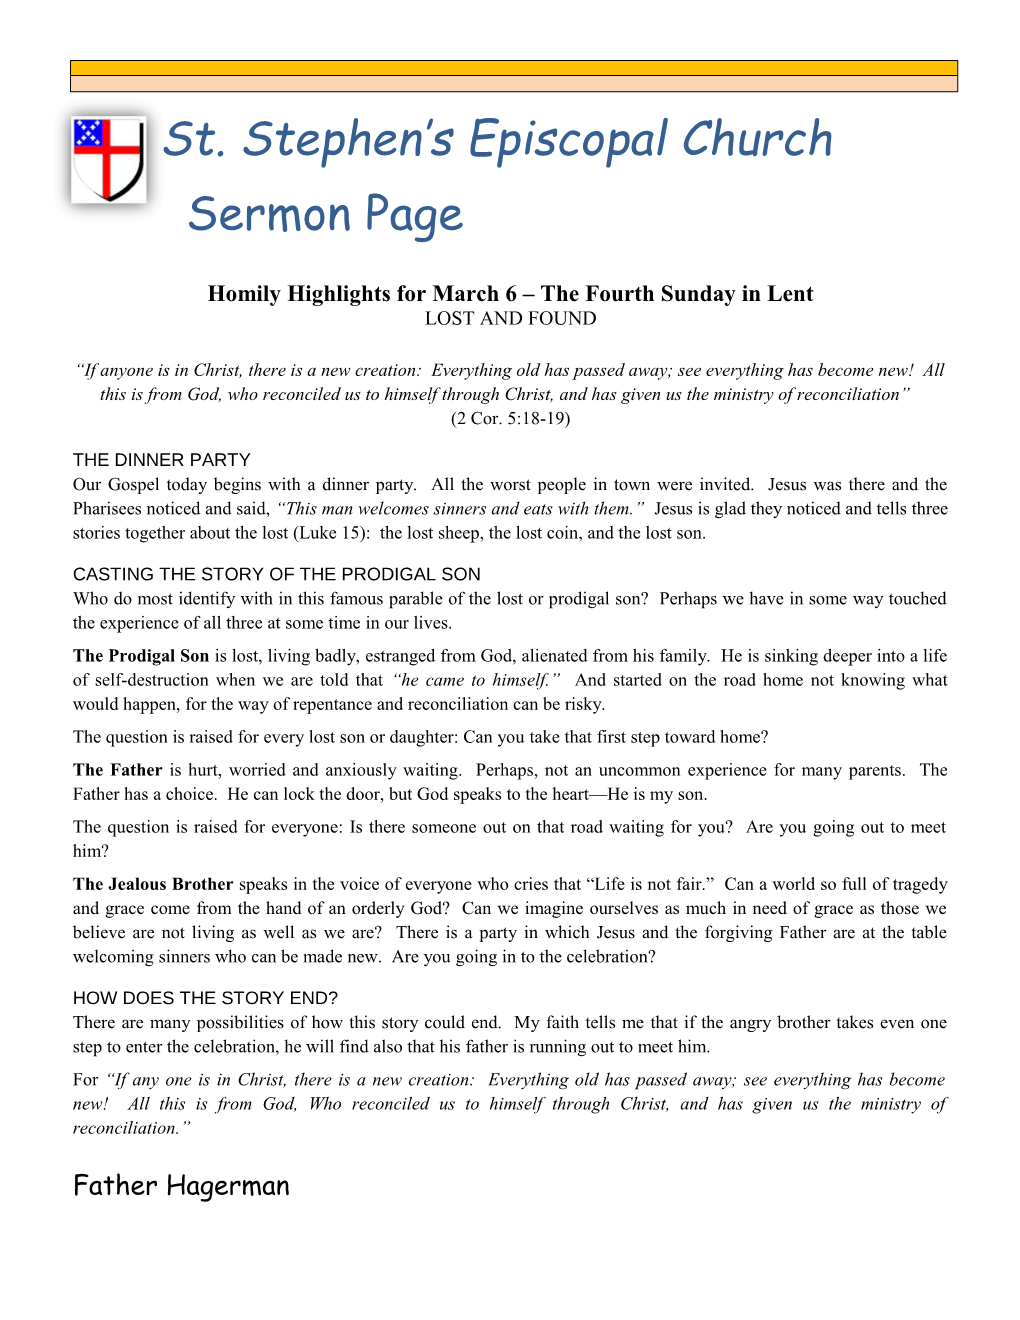 Homily Highlights for March 6 the Fourth Sunday in Lent